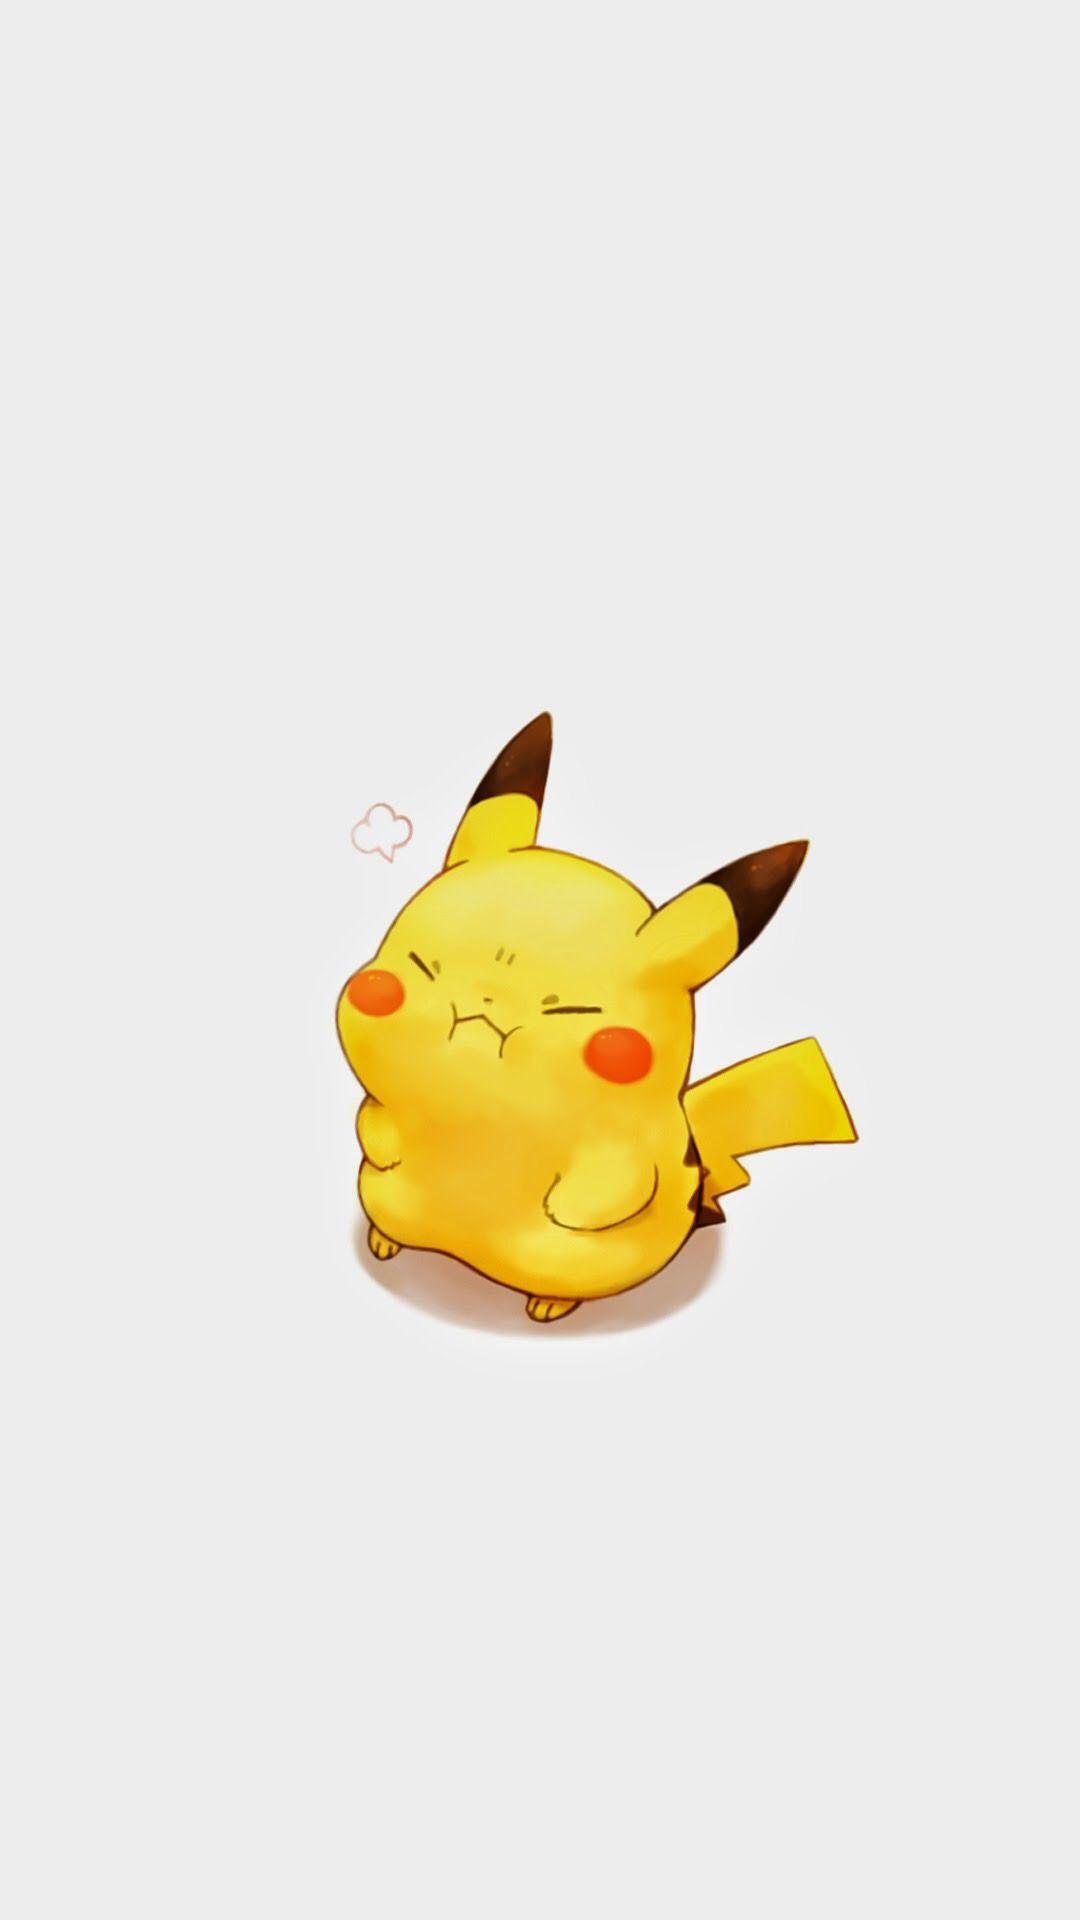 Tap Image For More Funny Cute Pikachu Pikachu Mobile For IPhone S C